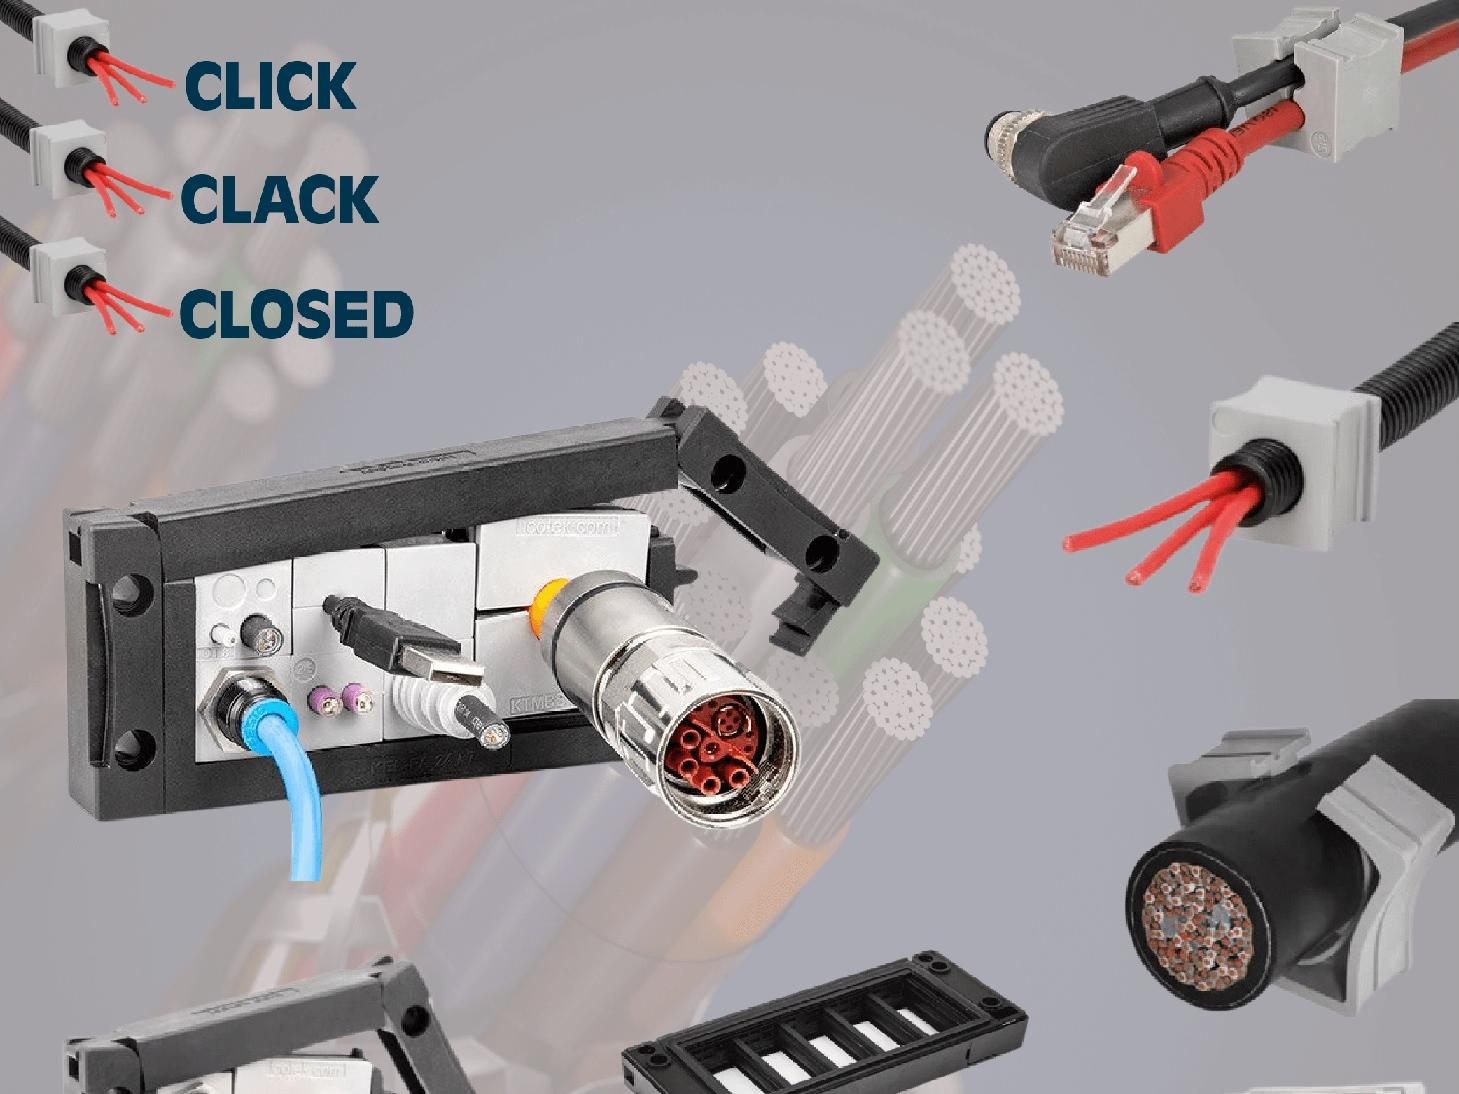 ‘Click-clack-closed’ tool-free assembly